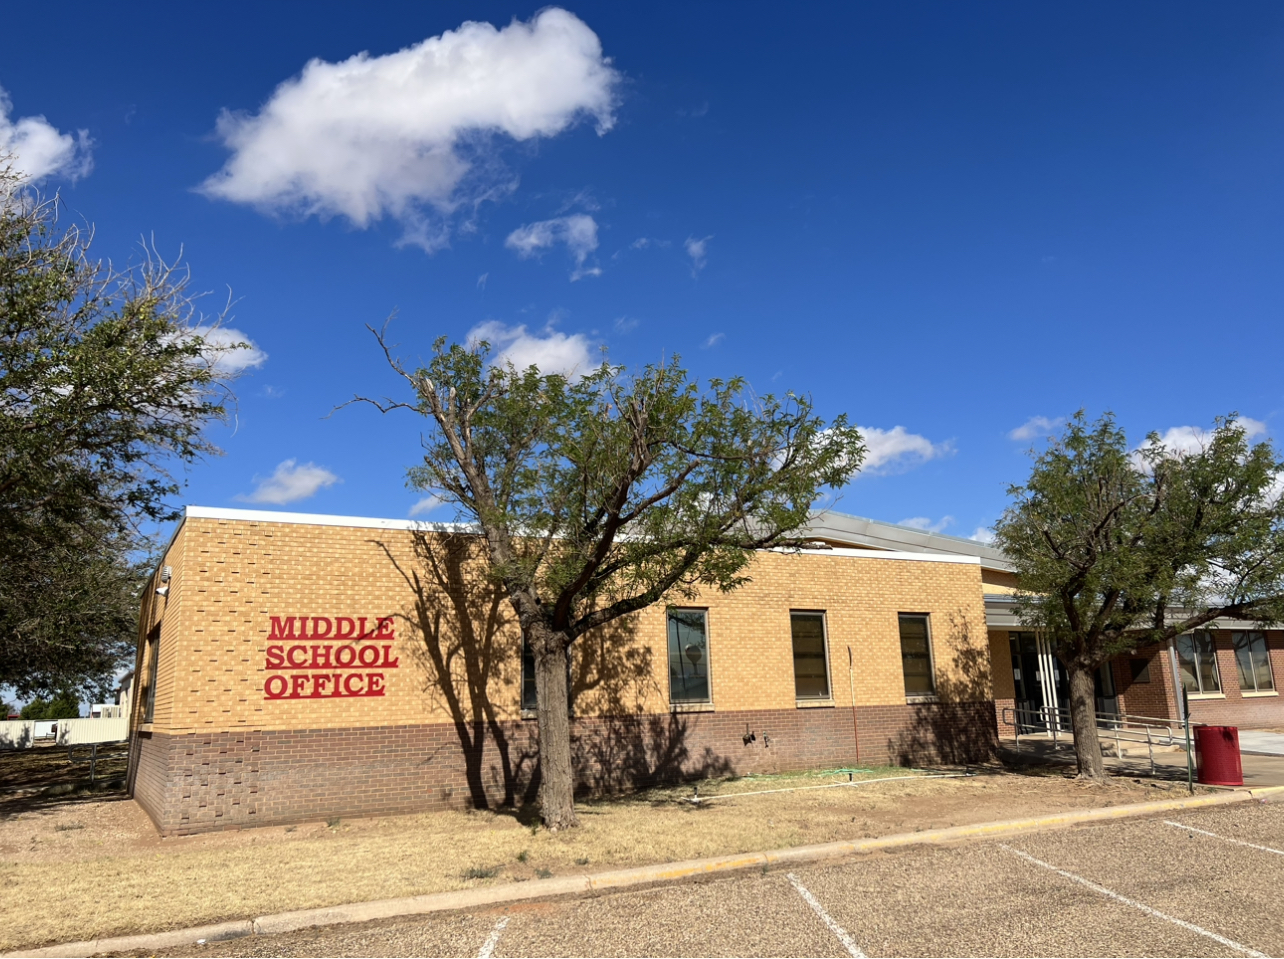 Seagraves Middle School